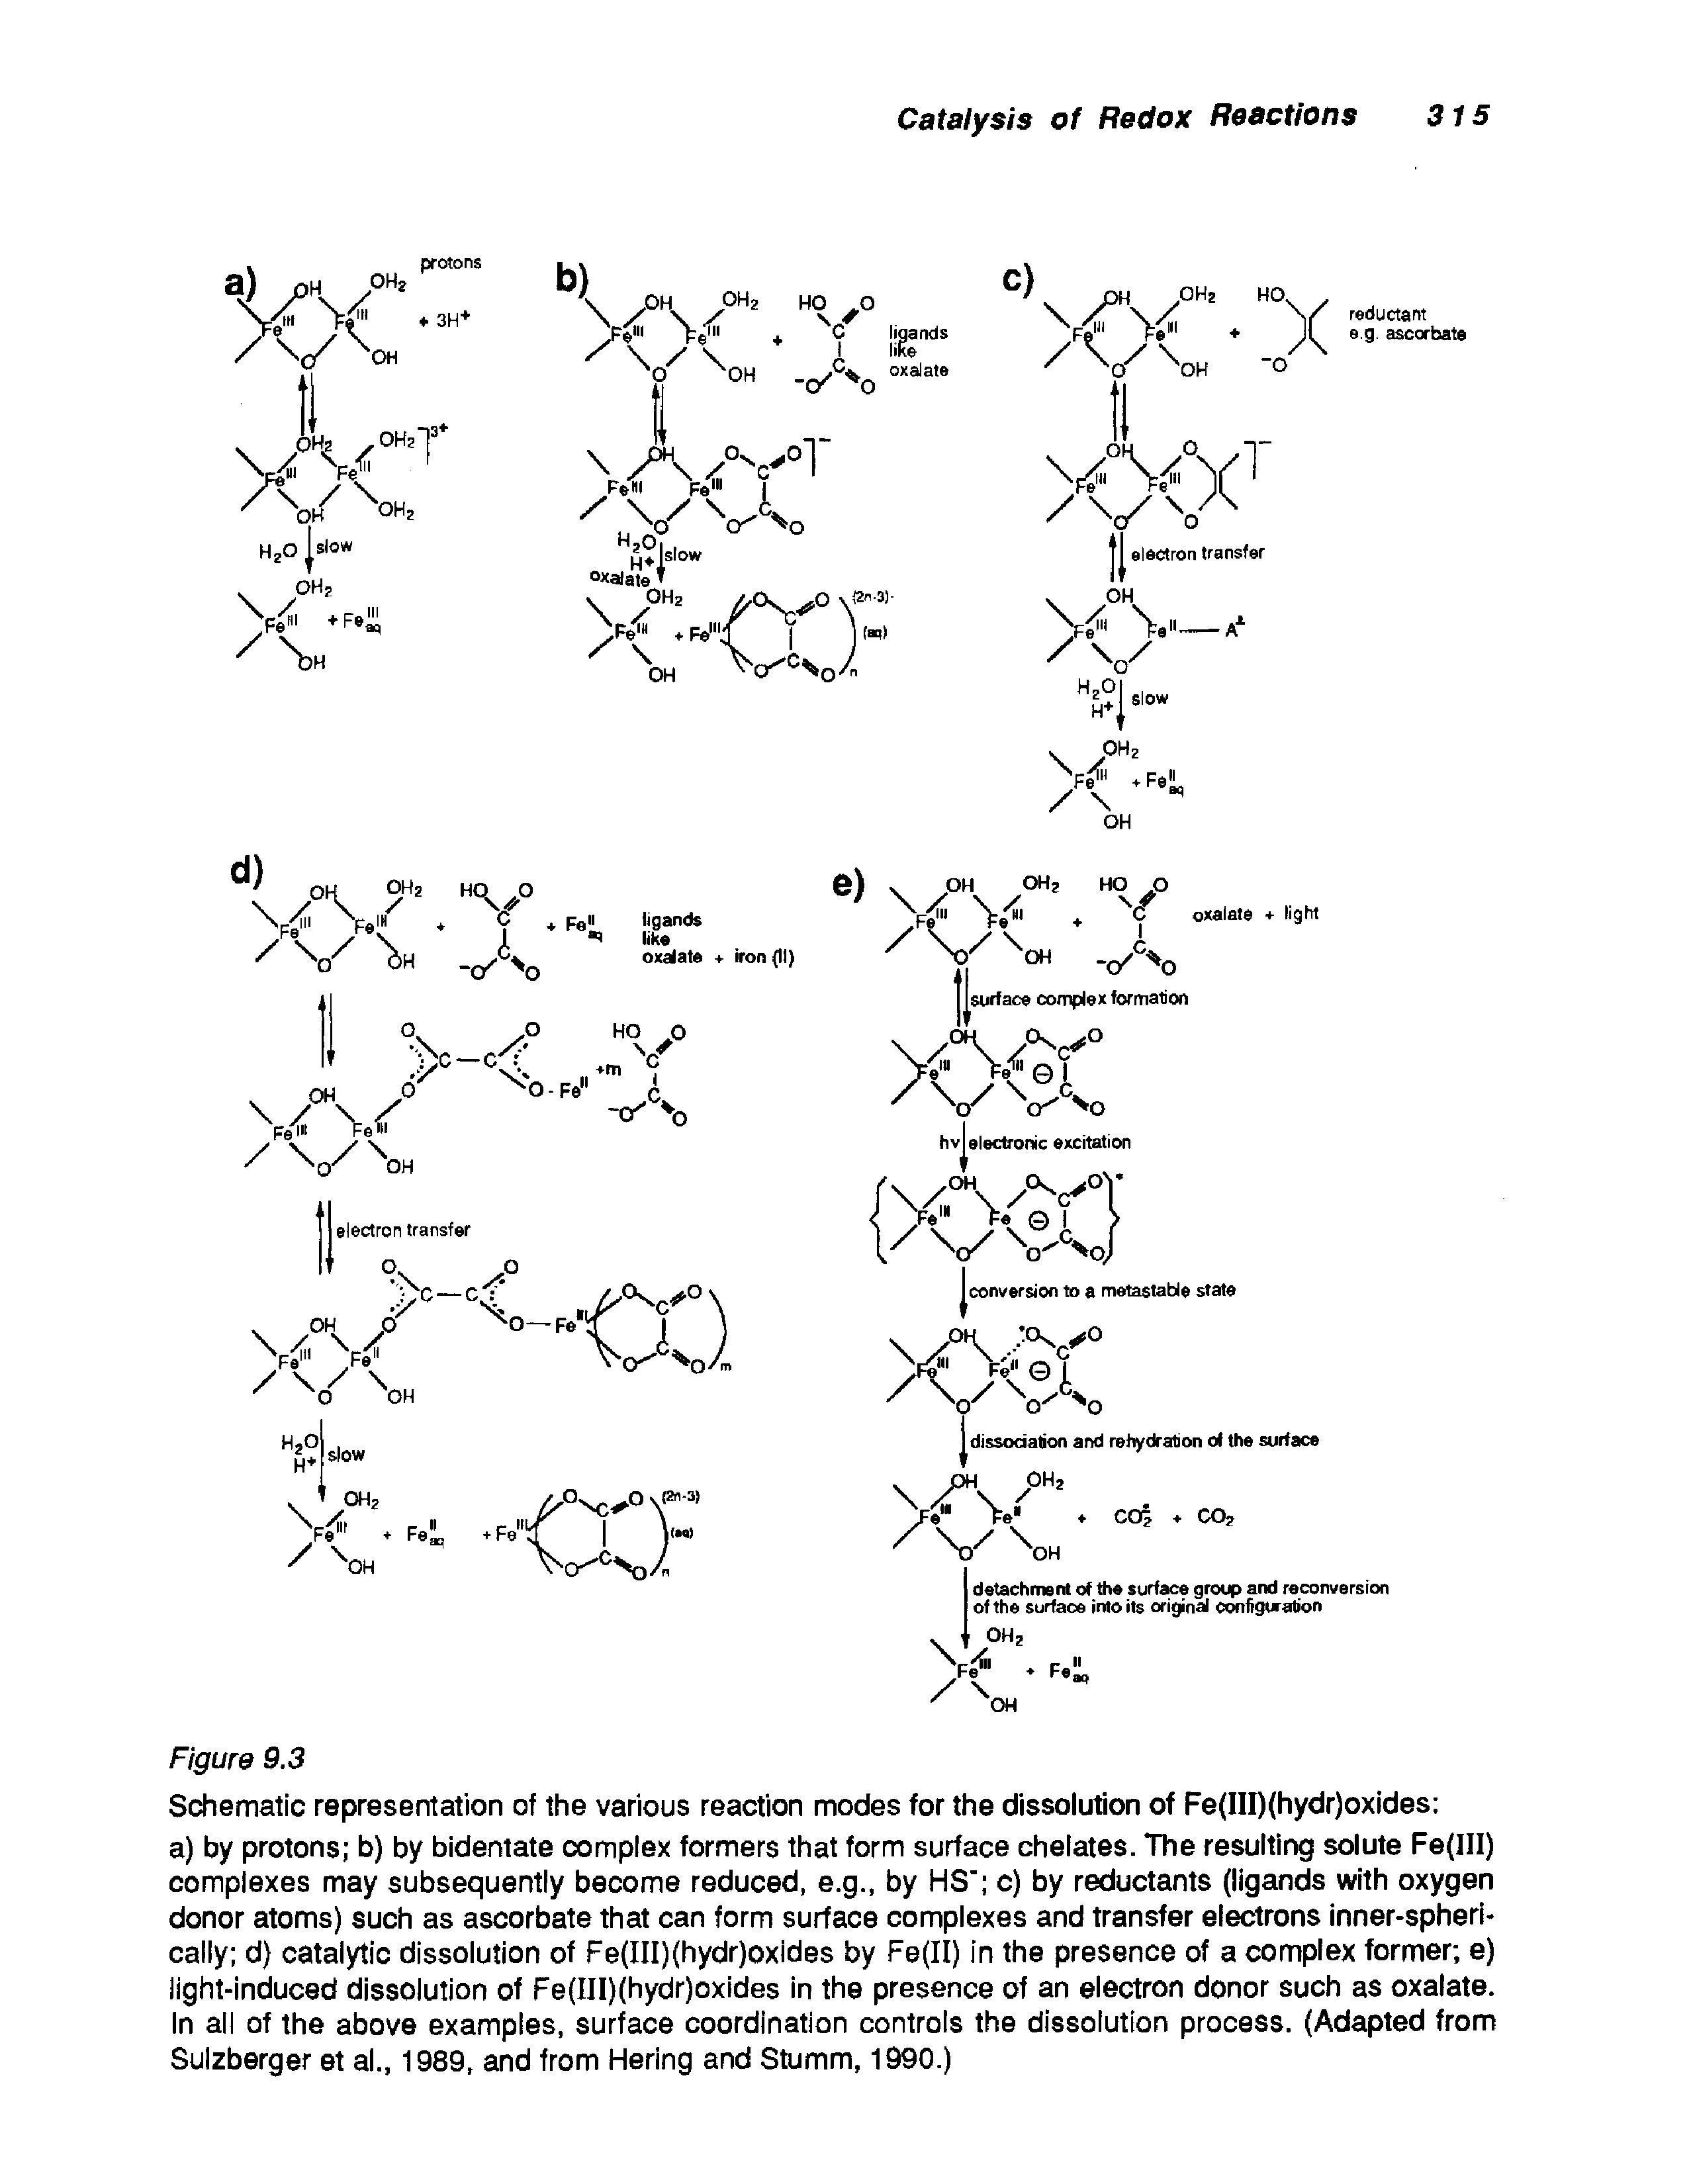 Schematic representation of the various reaction modes for the dissolution of Fe(III)(hydr)oxides a) by protons b) by bidentate complex formers that form surface chelates. The resulting solute Fe(III) complexes may subsequently become reduced, e.g., by HS c) by reductants (ligands with oxygen donor atoms) such as ascorbate that can form surface complexes and transfer electrons inner-spheri-cally d) catalytic dissolution of Fe(III)(hydr)oxides by Fe(II) in the presence of a complex former e) light-induced dissolution of Fe(III)(hydr)oxides in the presence of an electron donor such as oxalate. In all of the above examples, surface coordination controls the dissolution process. (Adapted from Sulzberger et al., 1989, and from Hering and Stumm, 1990.)...